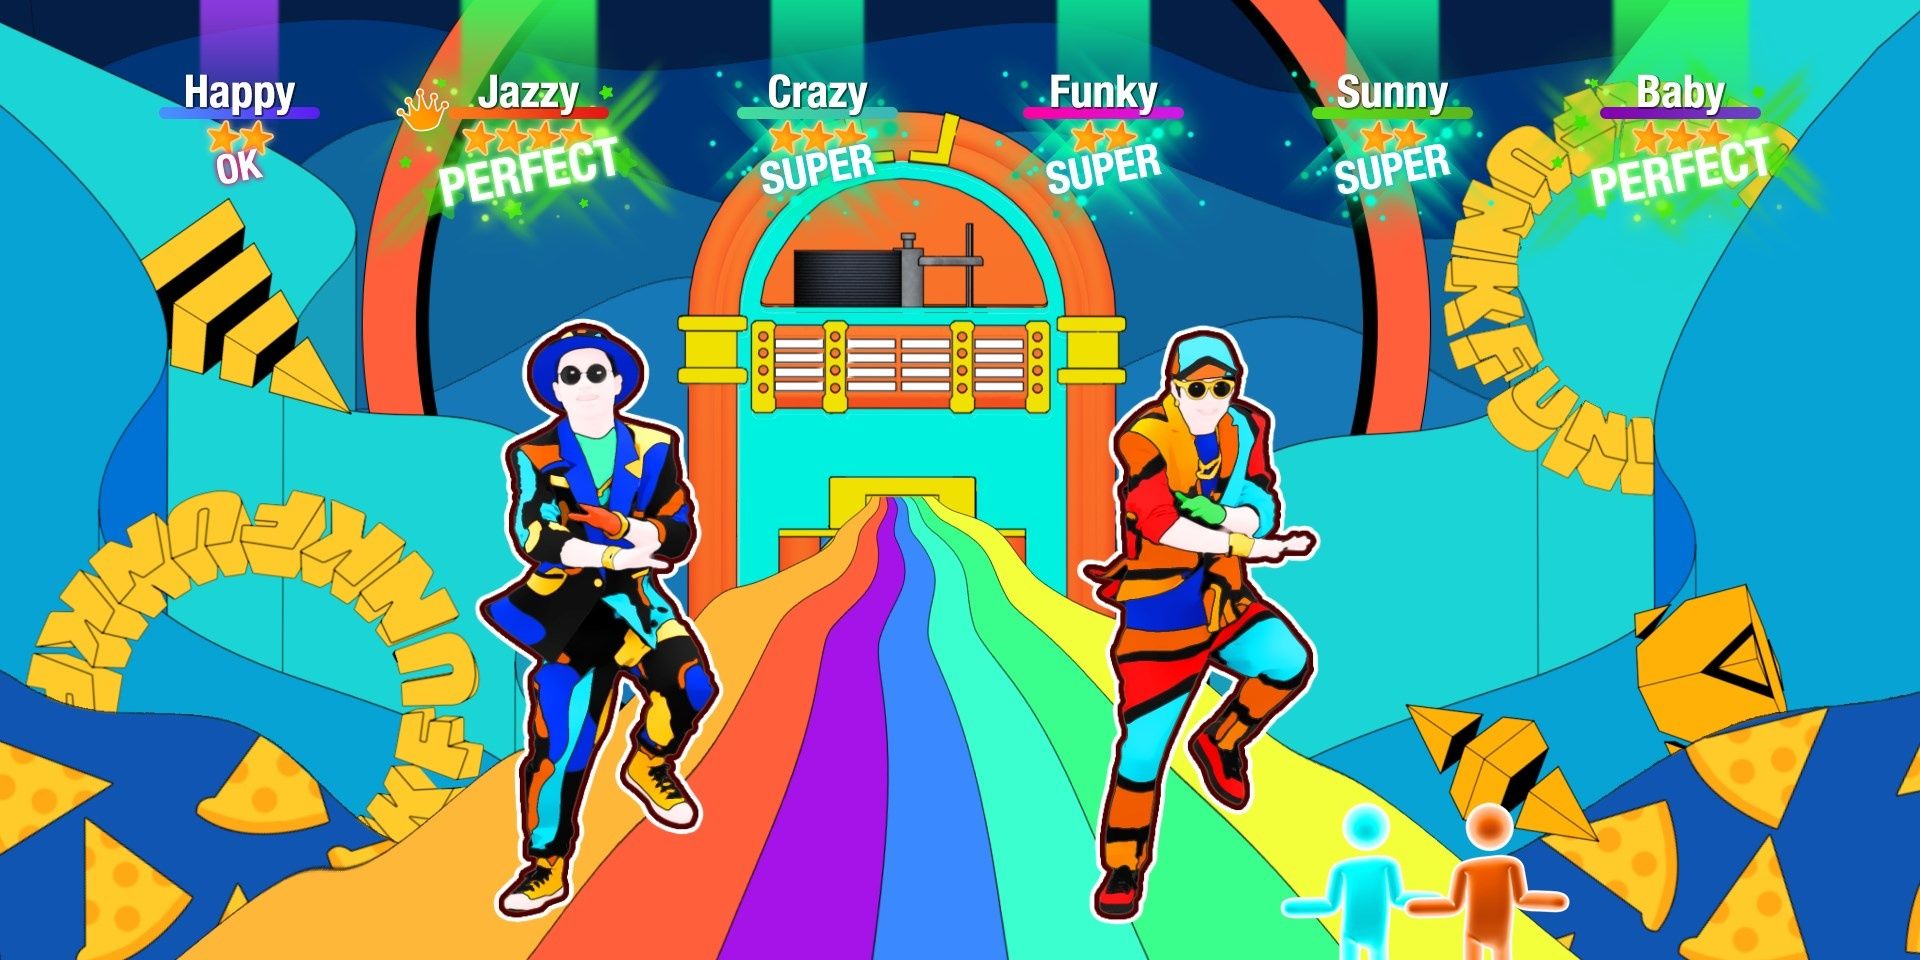 Best Motion Games Switch - Just Dance 2022 - Two Dancers Dancing On A Rainbow Bridge